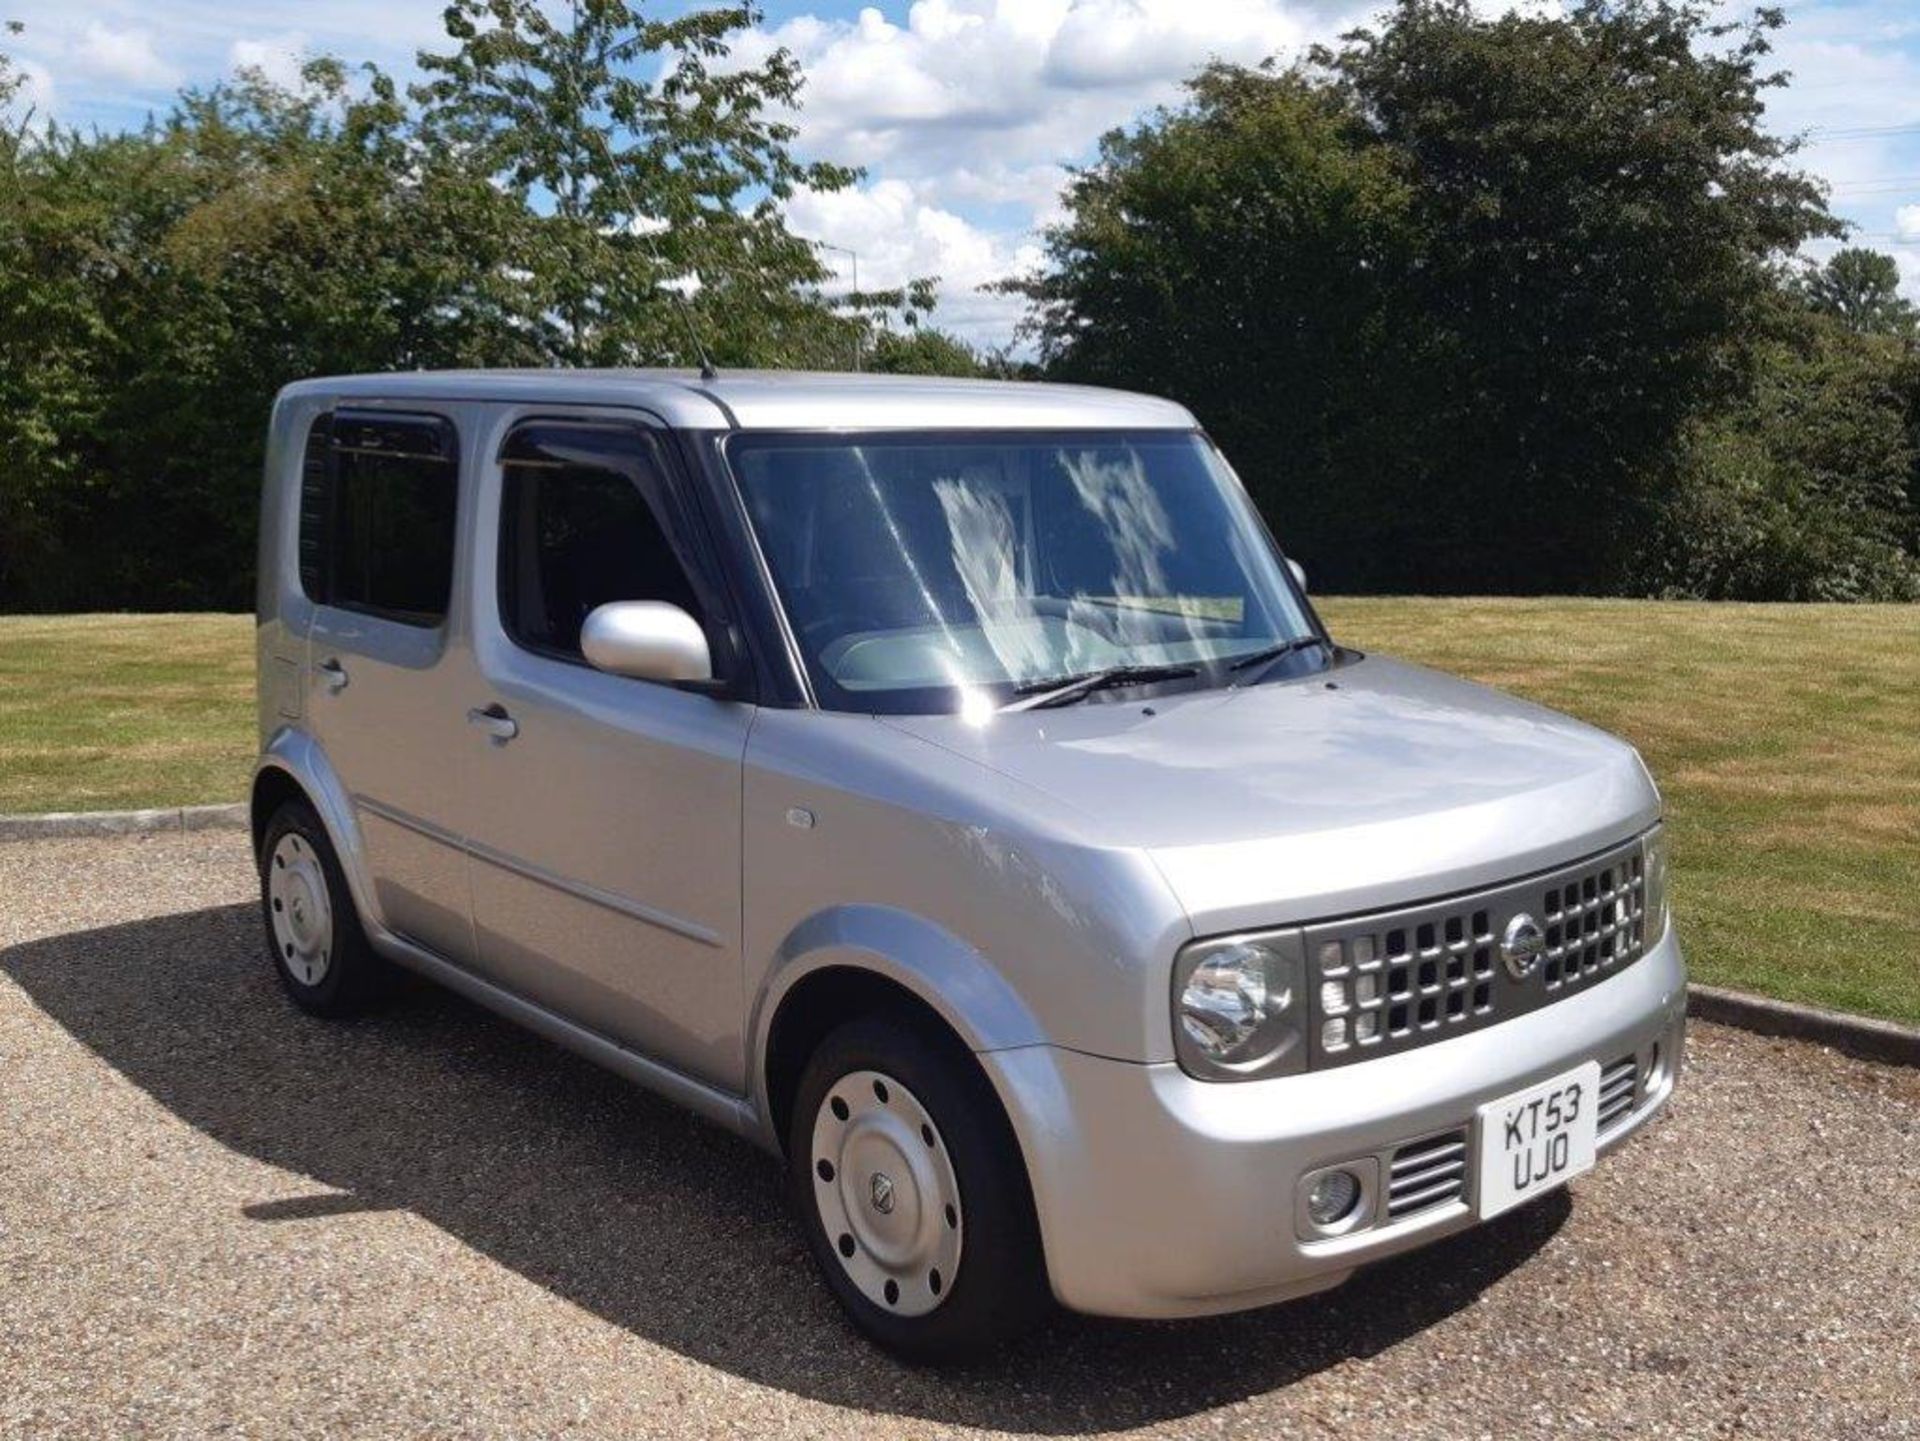 2003 Nissan Cube 1.4 Auto - Image 3 of 9